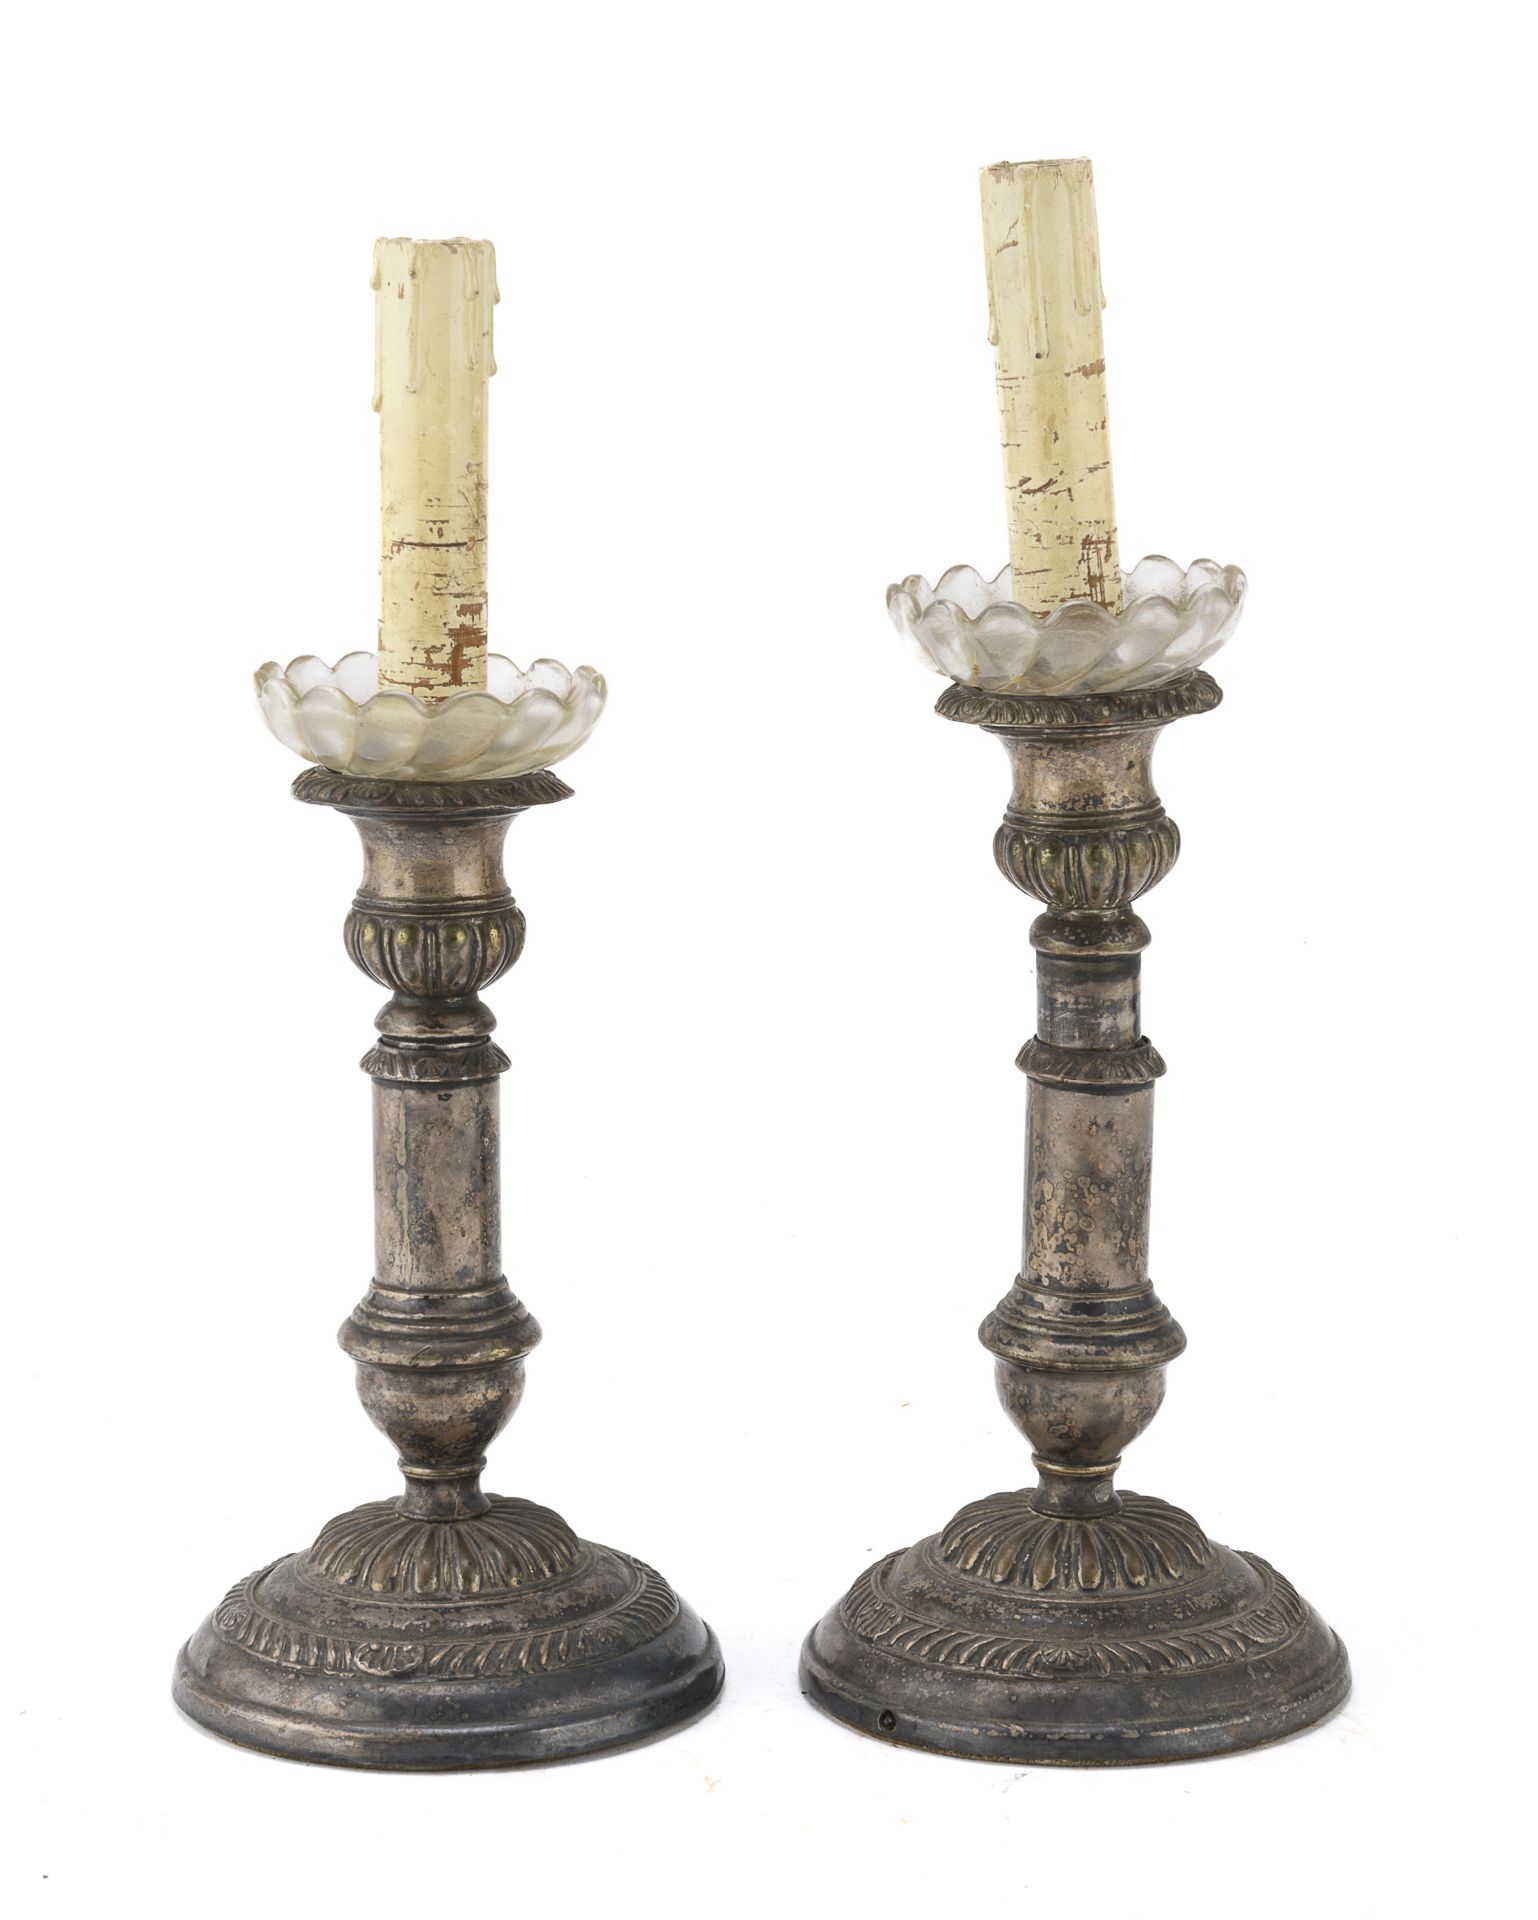 PAIR OF SILVER-PLATED CANDLESTICKS EARLY 20TH CENTURY